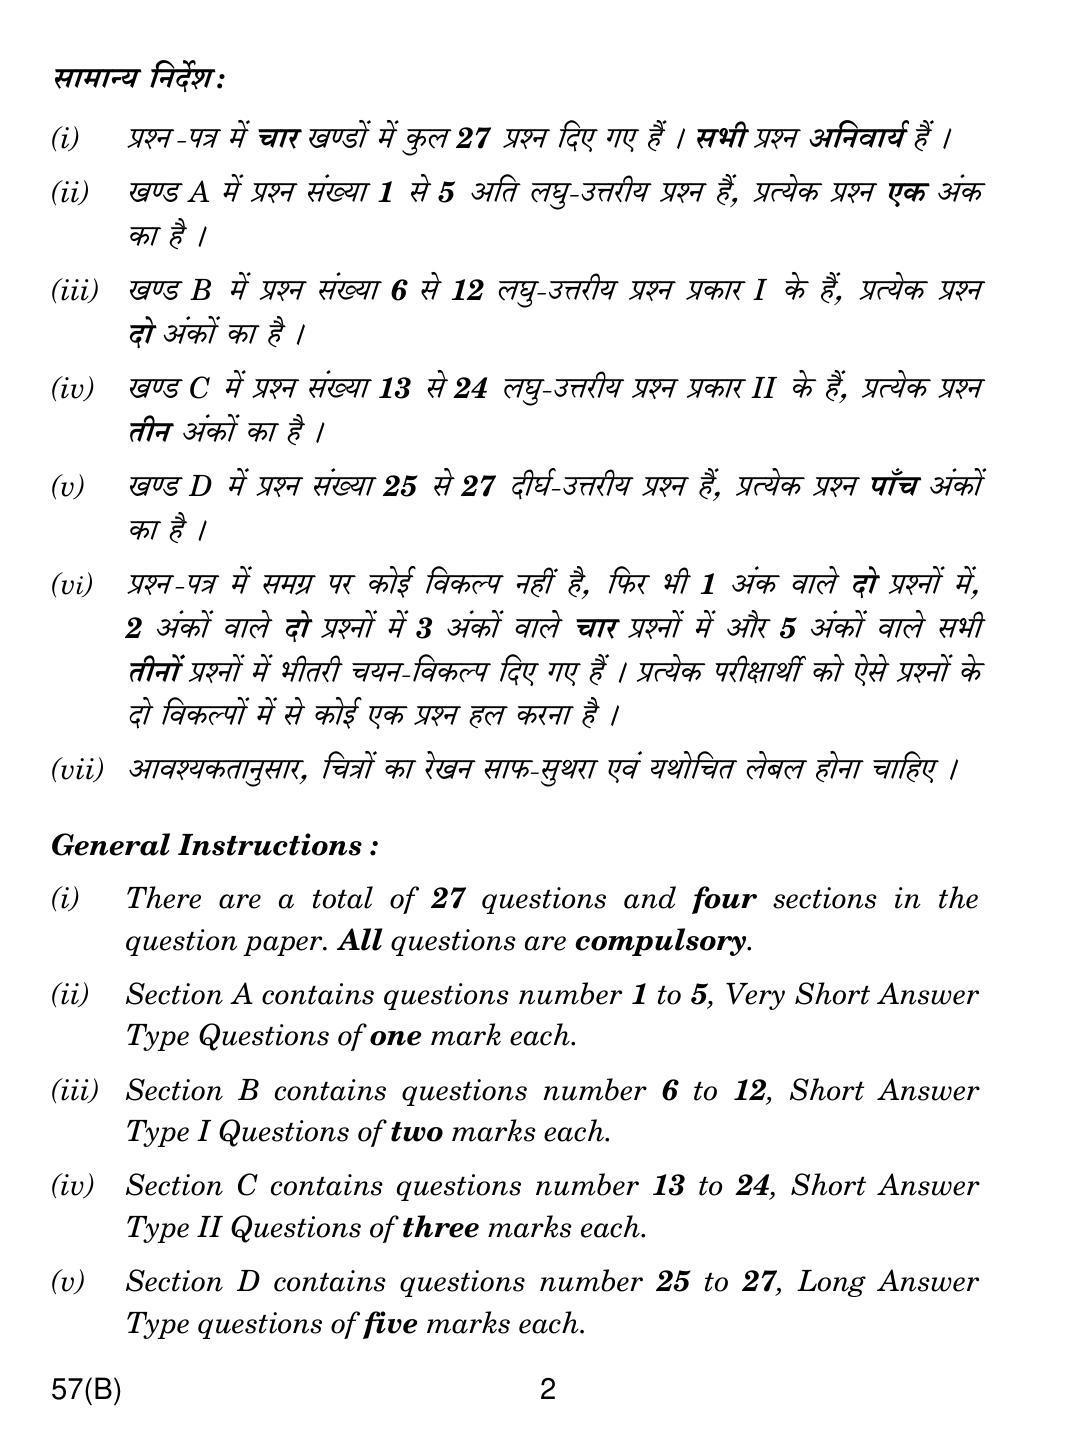 CBSE Class 12 57(B) Biology For Blind 2019 Question Paper - Page 2